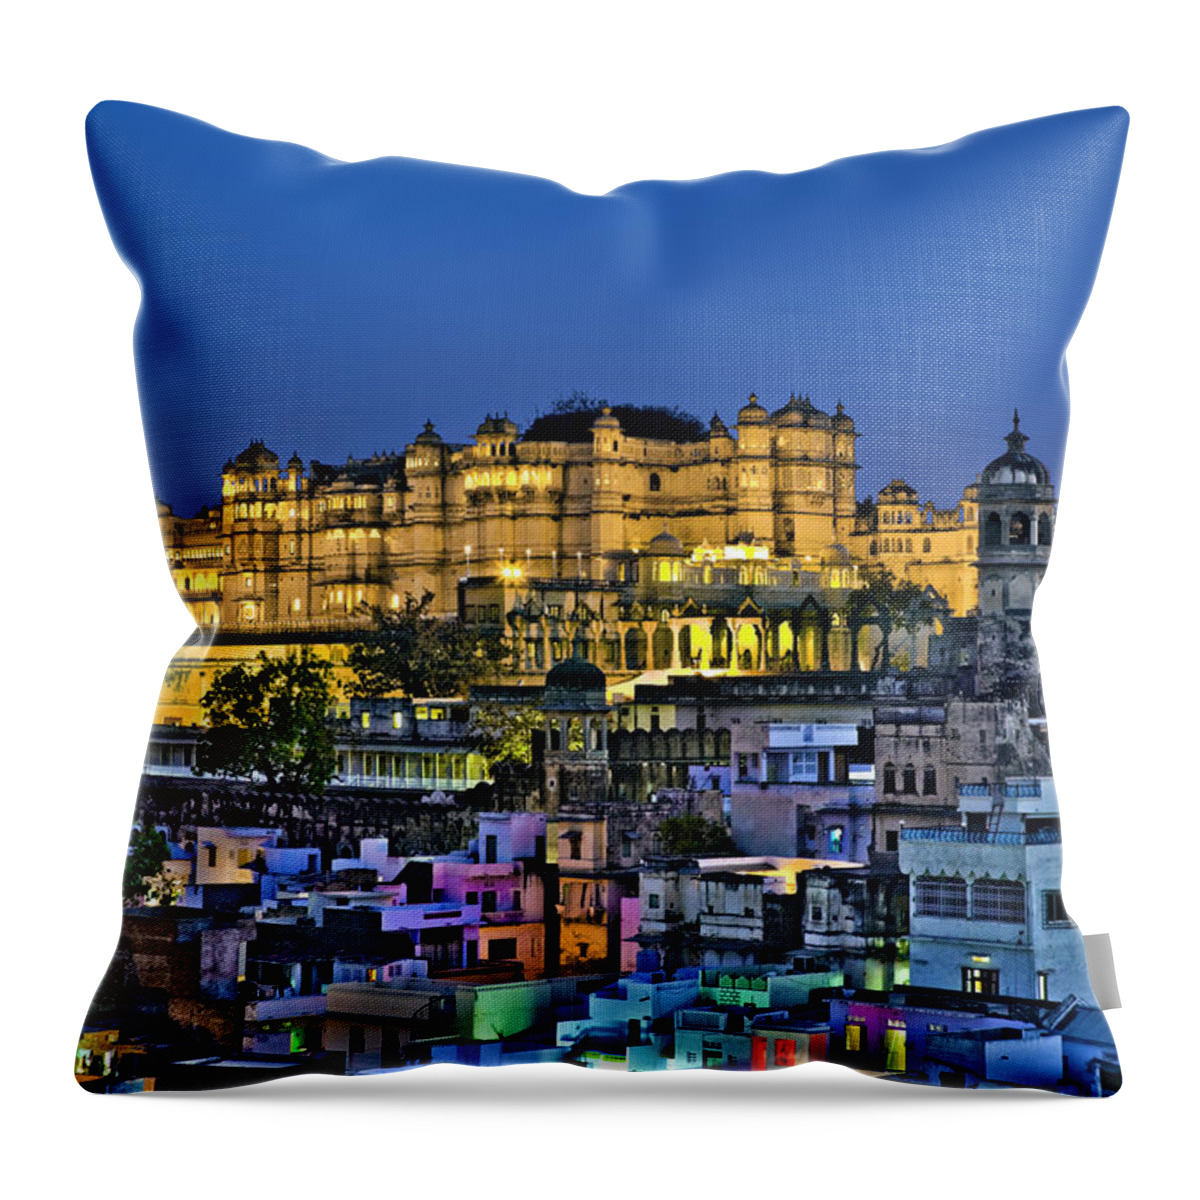 Clear Sky Throw Pillow featuring the photograph City Palace Udaipur India by Glen Allison